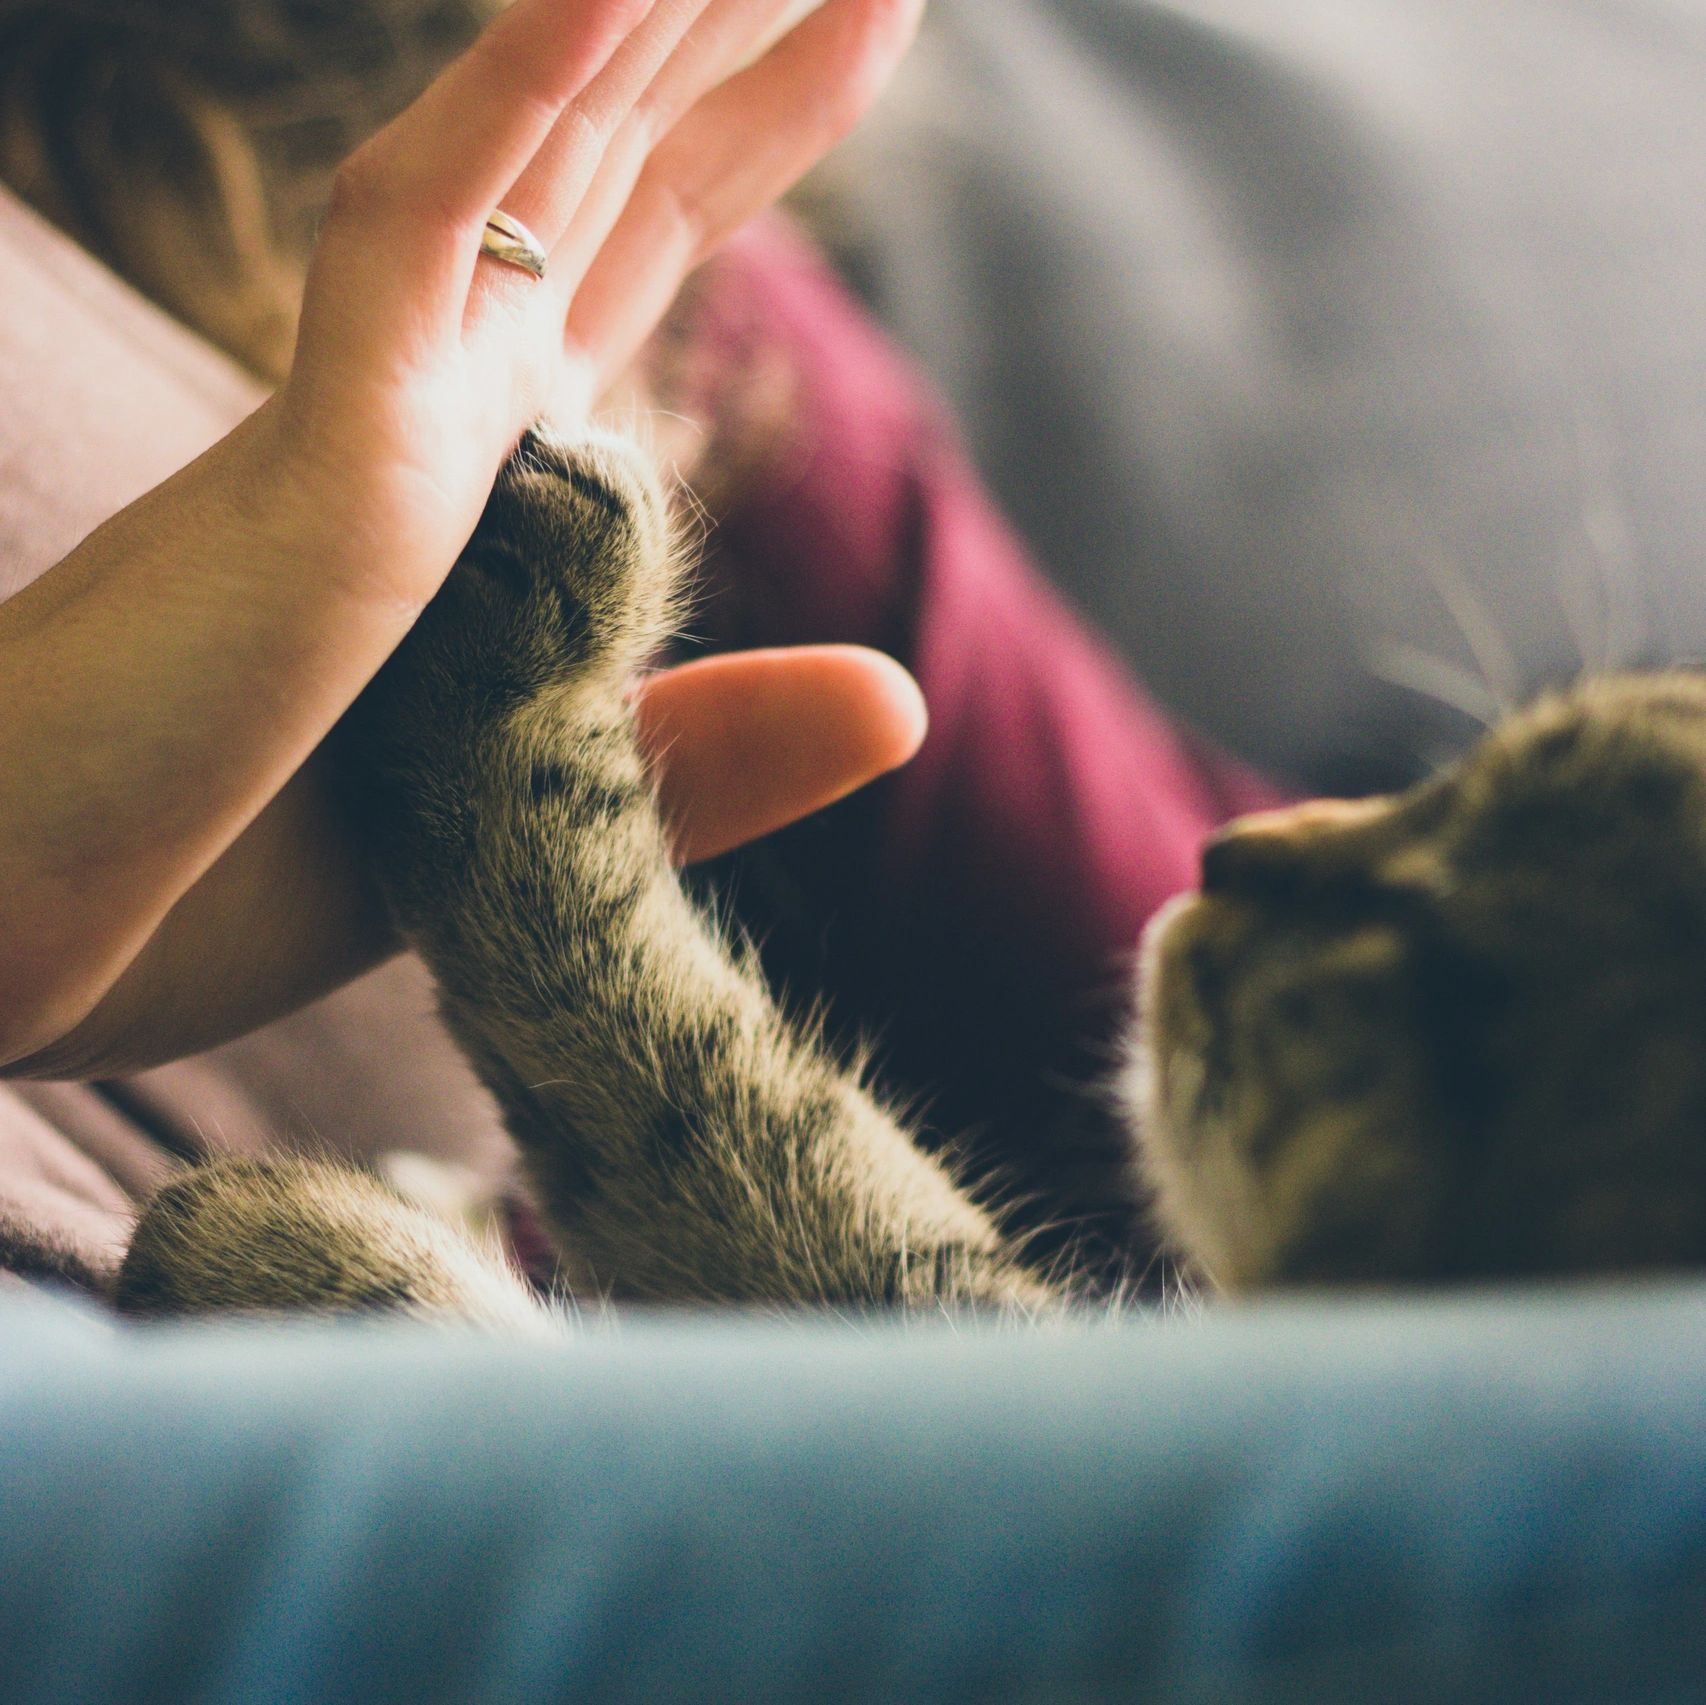 A cat gazing up at a human and high fiving their hand.